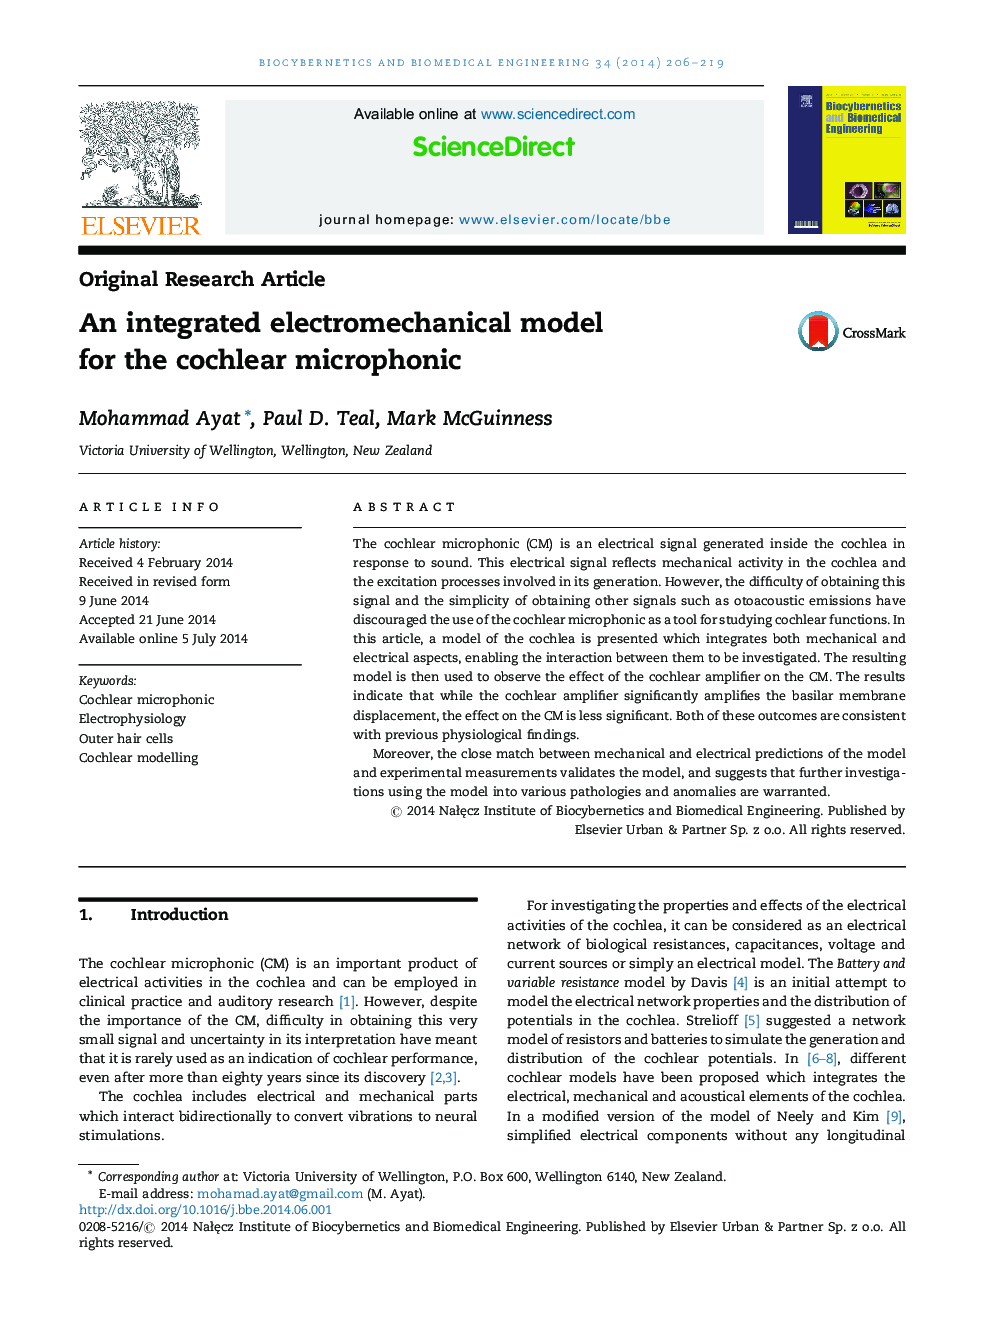 An integrated electromechanical model for the cochlear microphonic